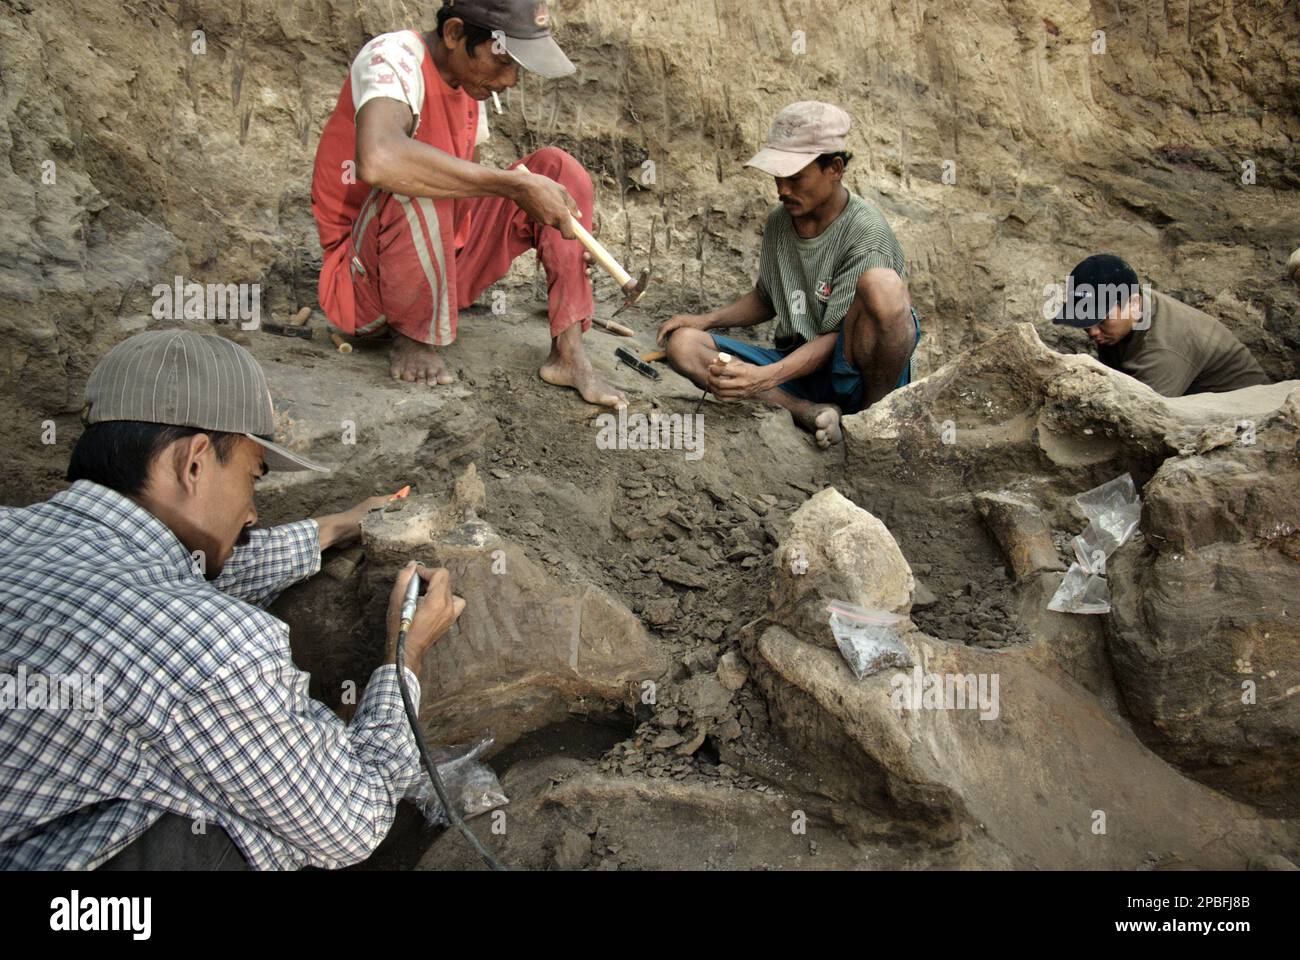 Paleontologist Iwan Kurniawan (left) is working with villagers and a fellow researcher on the excavation of fossilized bones of an extinct elephant species scientifically identified as Elephas hysudrindicus, or popularly called 'Blora elephant', in Sunggun, Mendalem, Kradenan, Blora, Central Java, Indonesia. The team of scientists from Vertebrate Research (Geological Agency, Indonesian Ministry of Energy and Mineral Resources) led by Kurniawan himself with Fachroel Aziz discovered the species' bones almost entirely (around 90 percent complete) that later would allow them to build a... Stock Photo